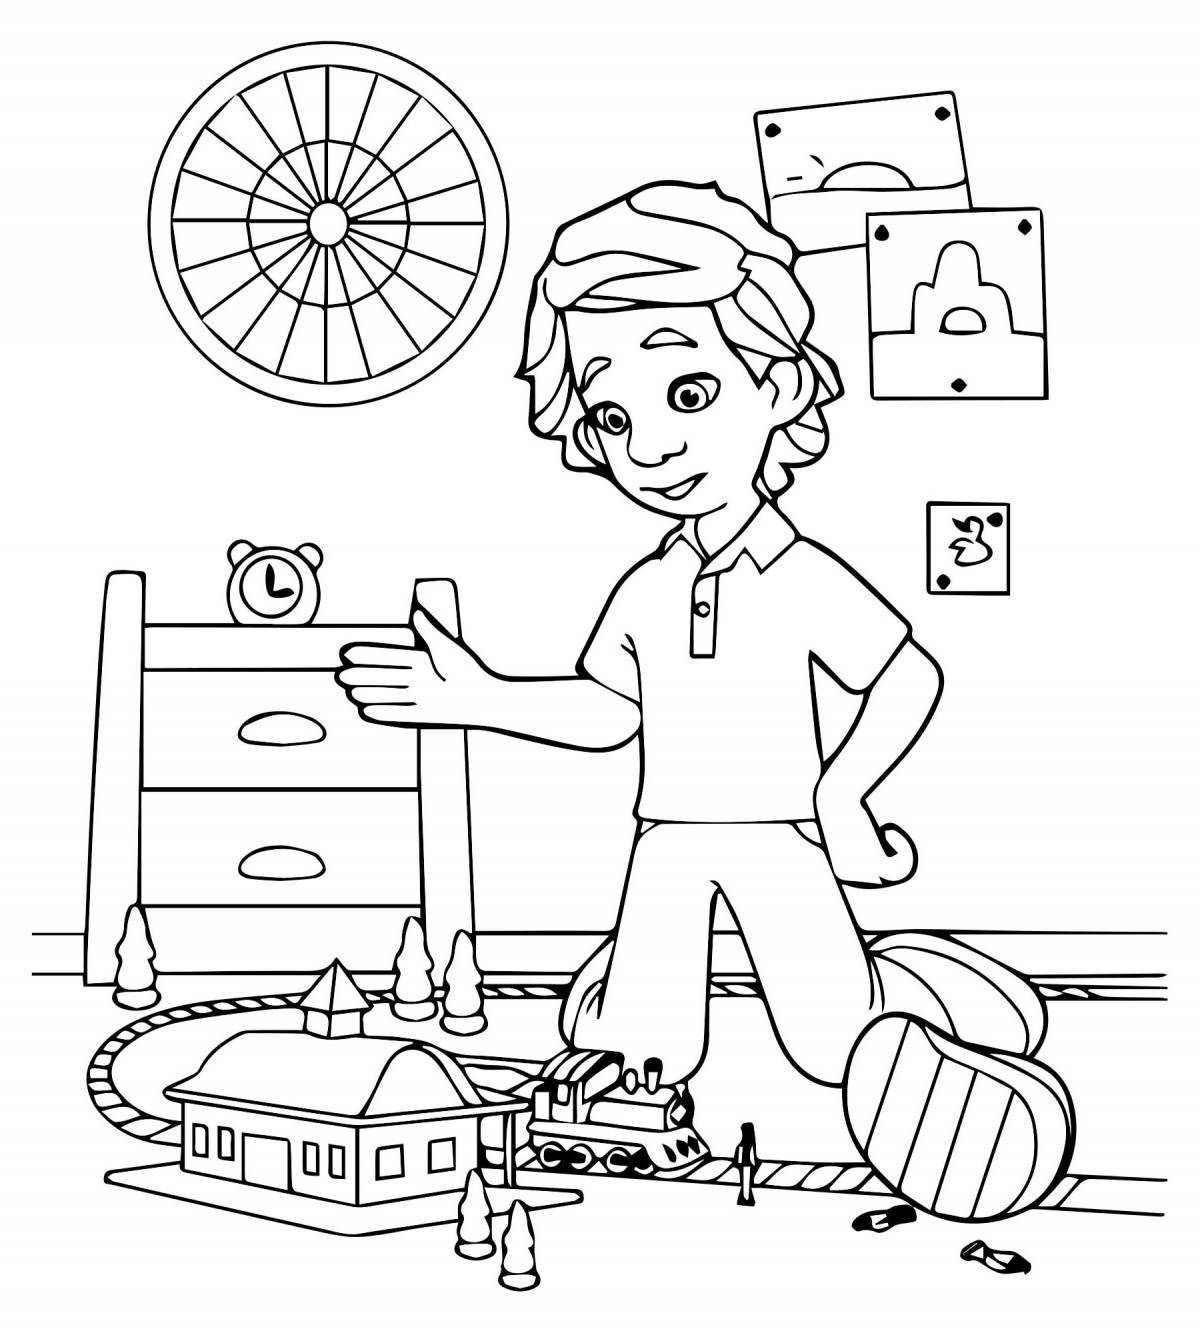 Colorful fixies washing machine coloring page